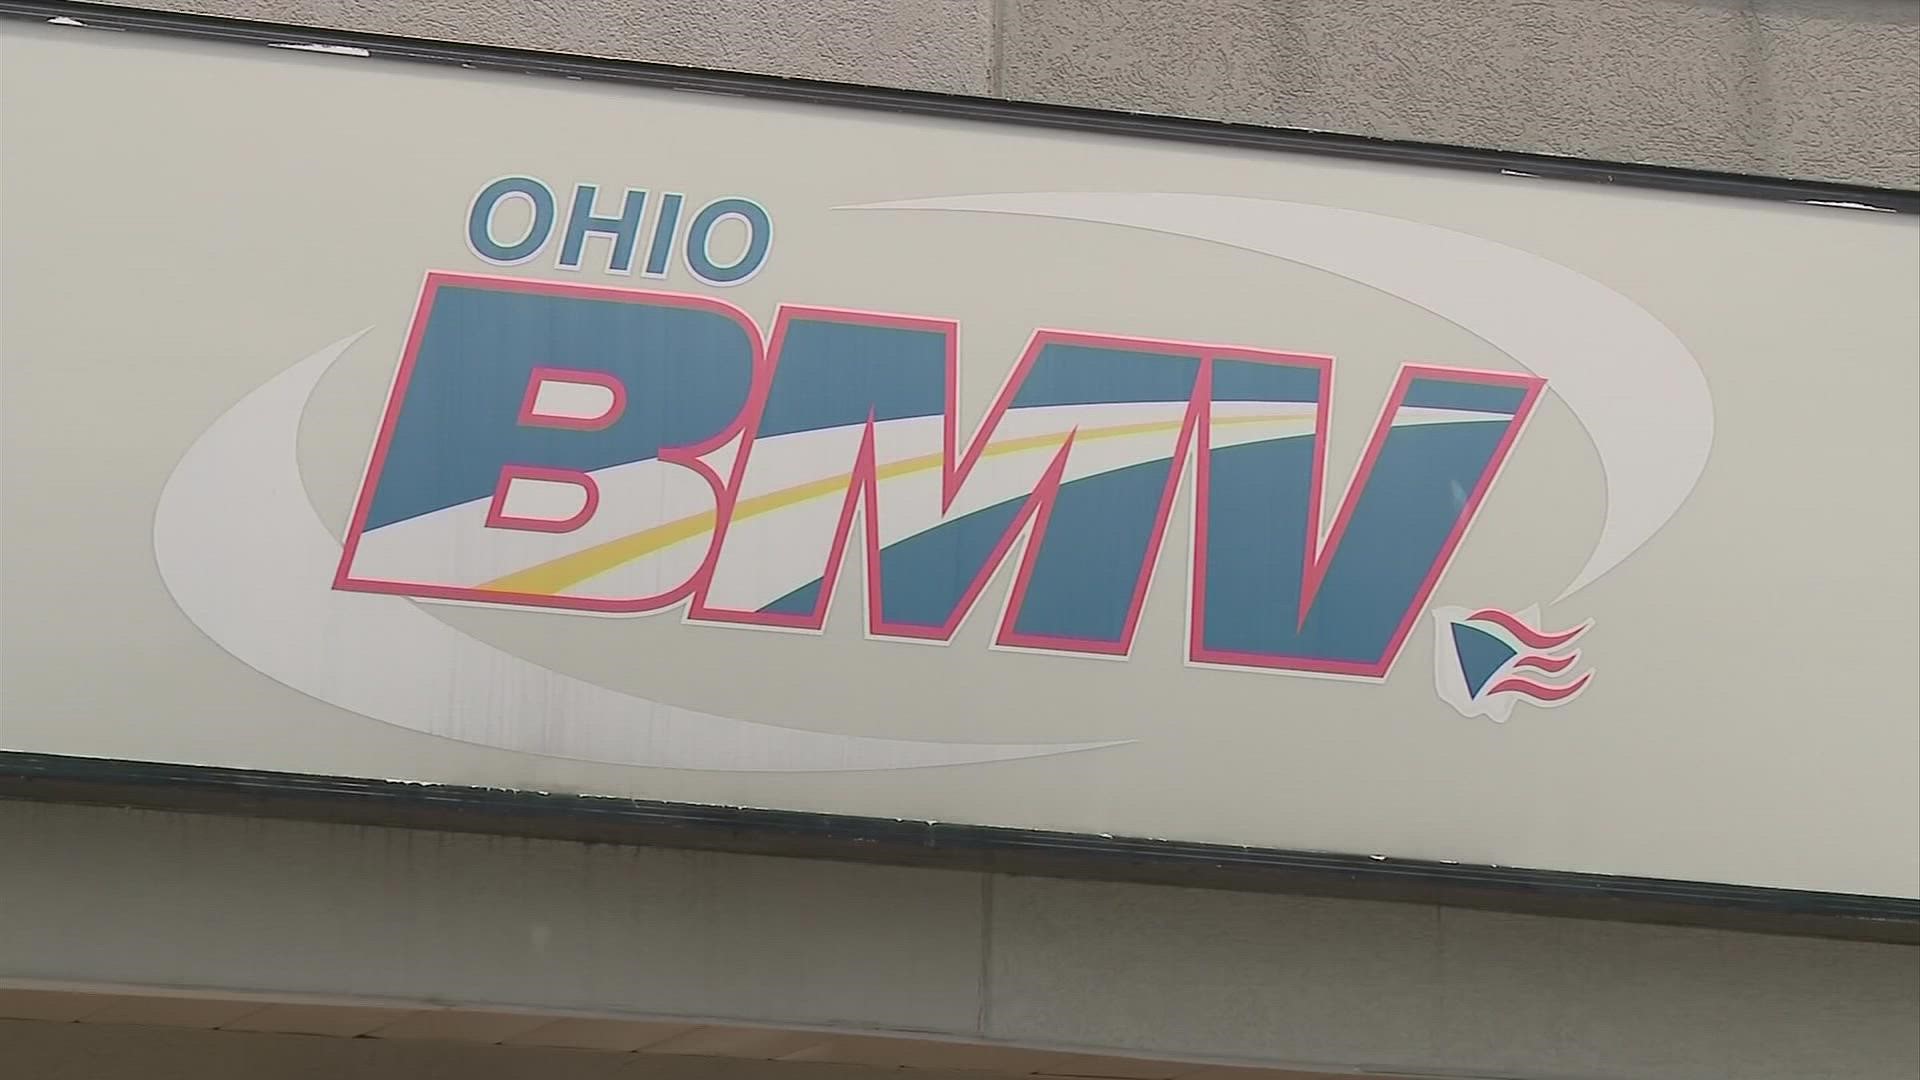 According to the Ohio Bureau of Motor Vehicles, the typical wait time to schedule an exam is about three weeks.